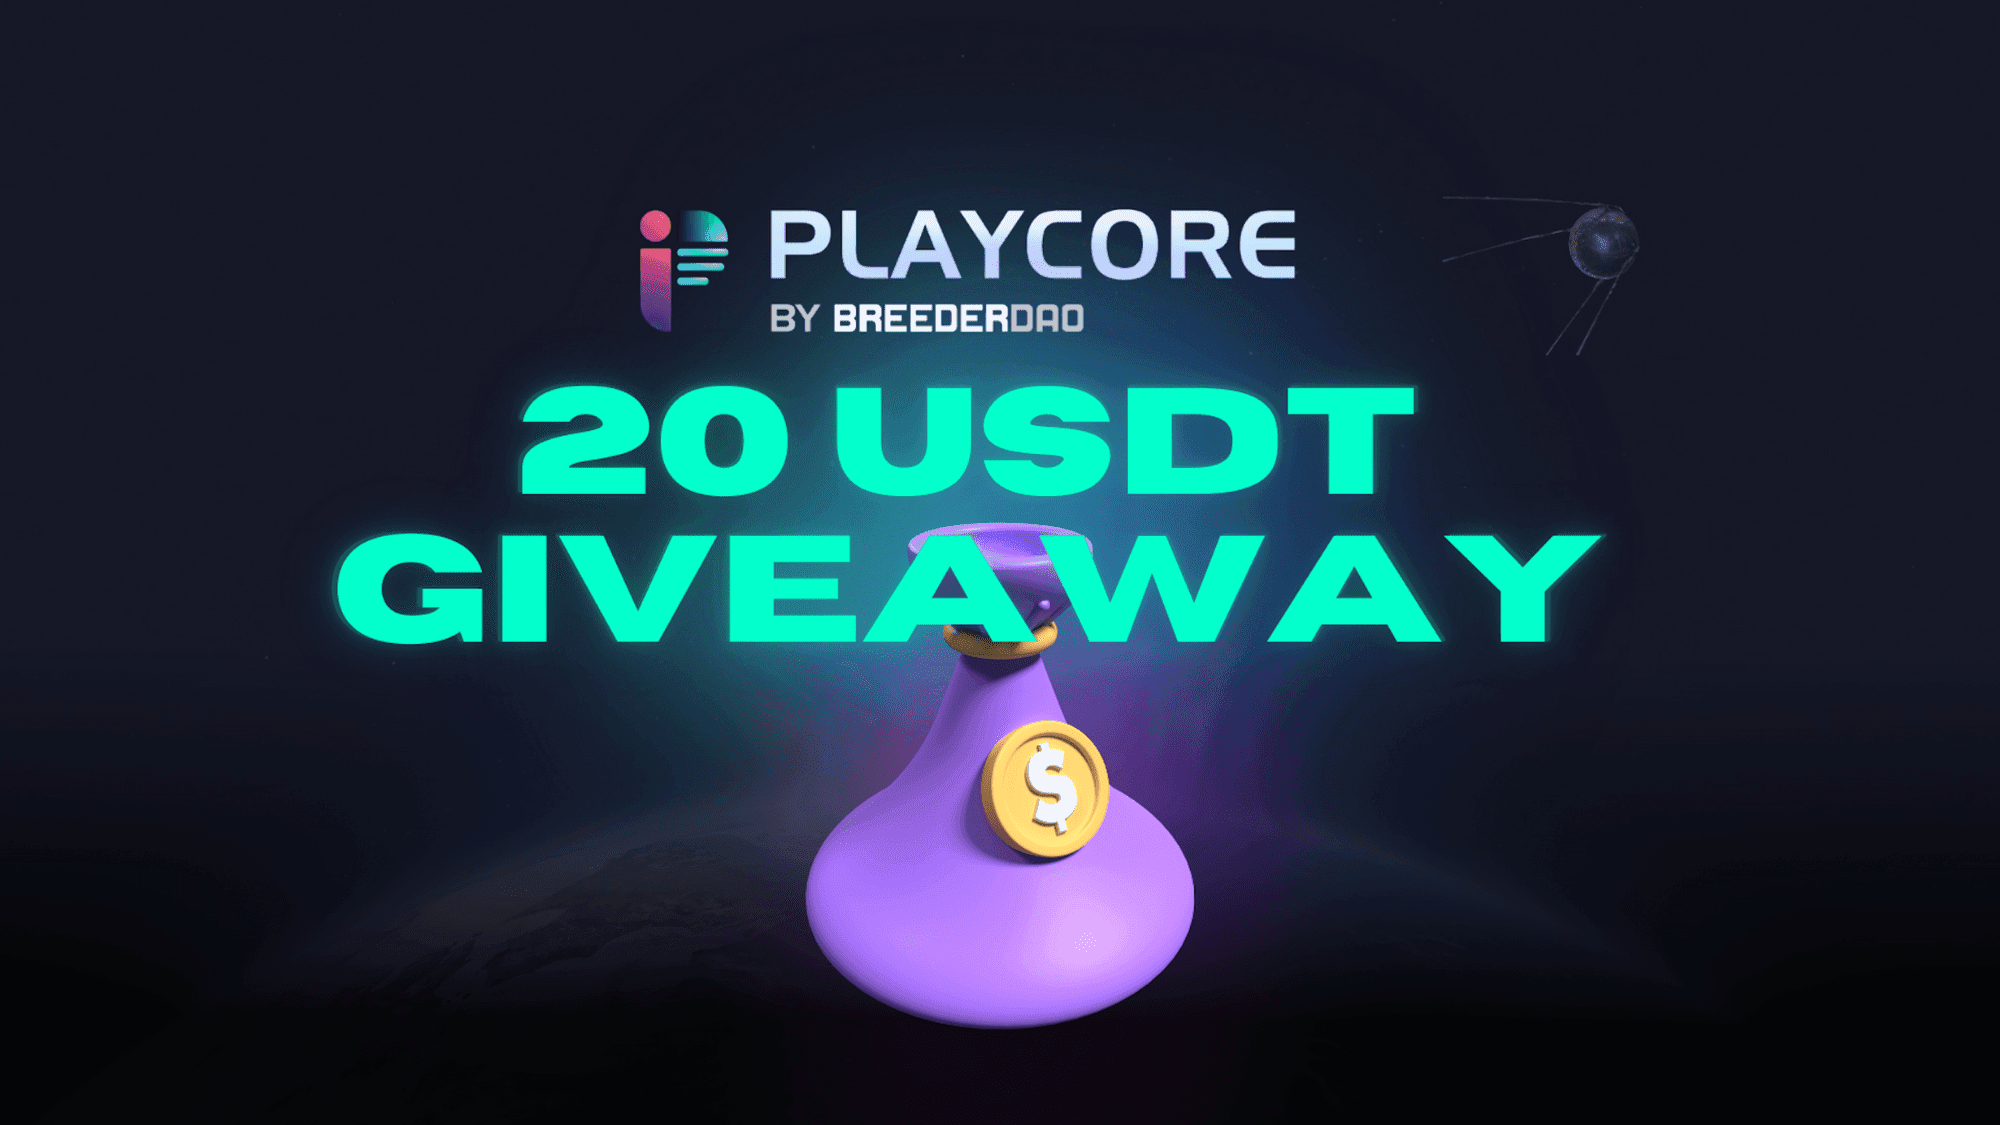 Sign up now to Playcore and Win 20 USDT! 💰